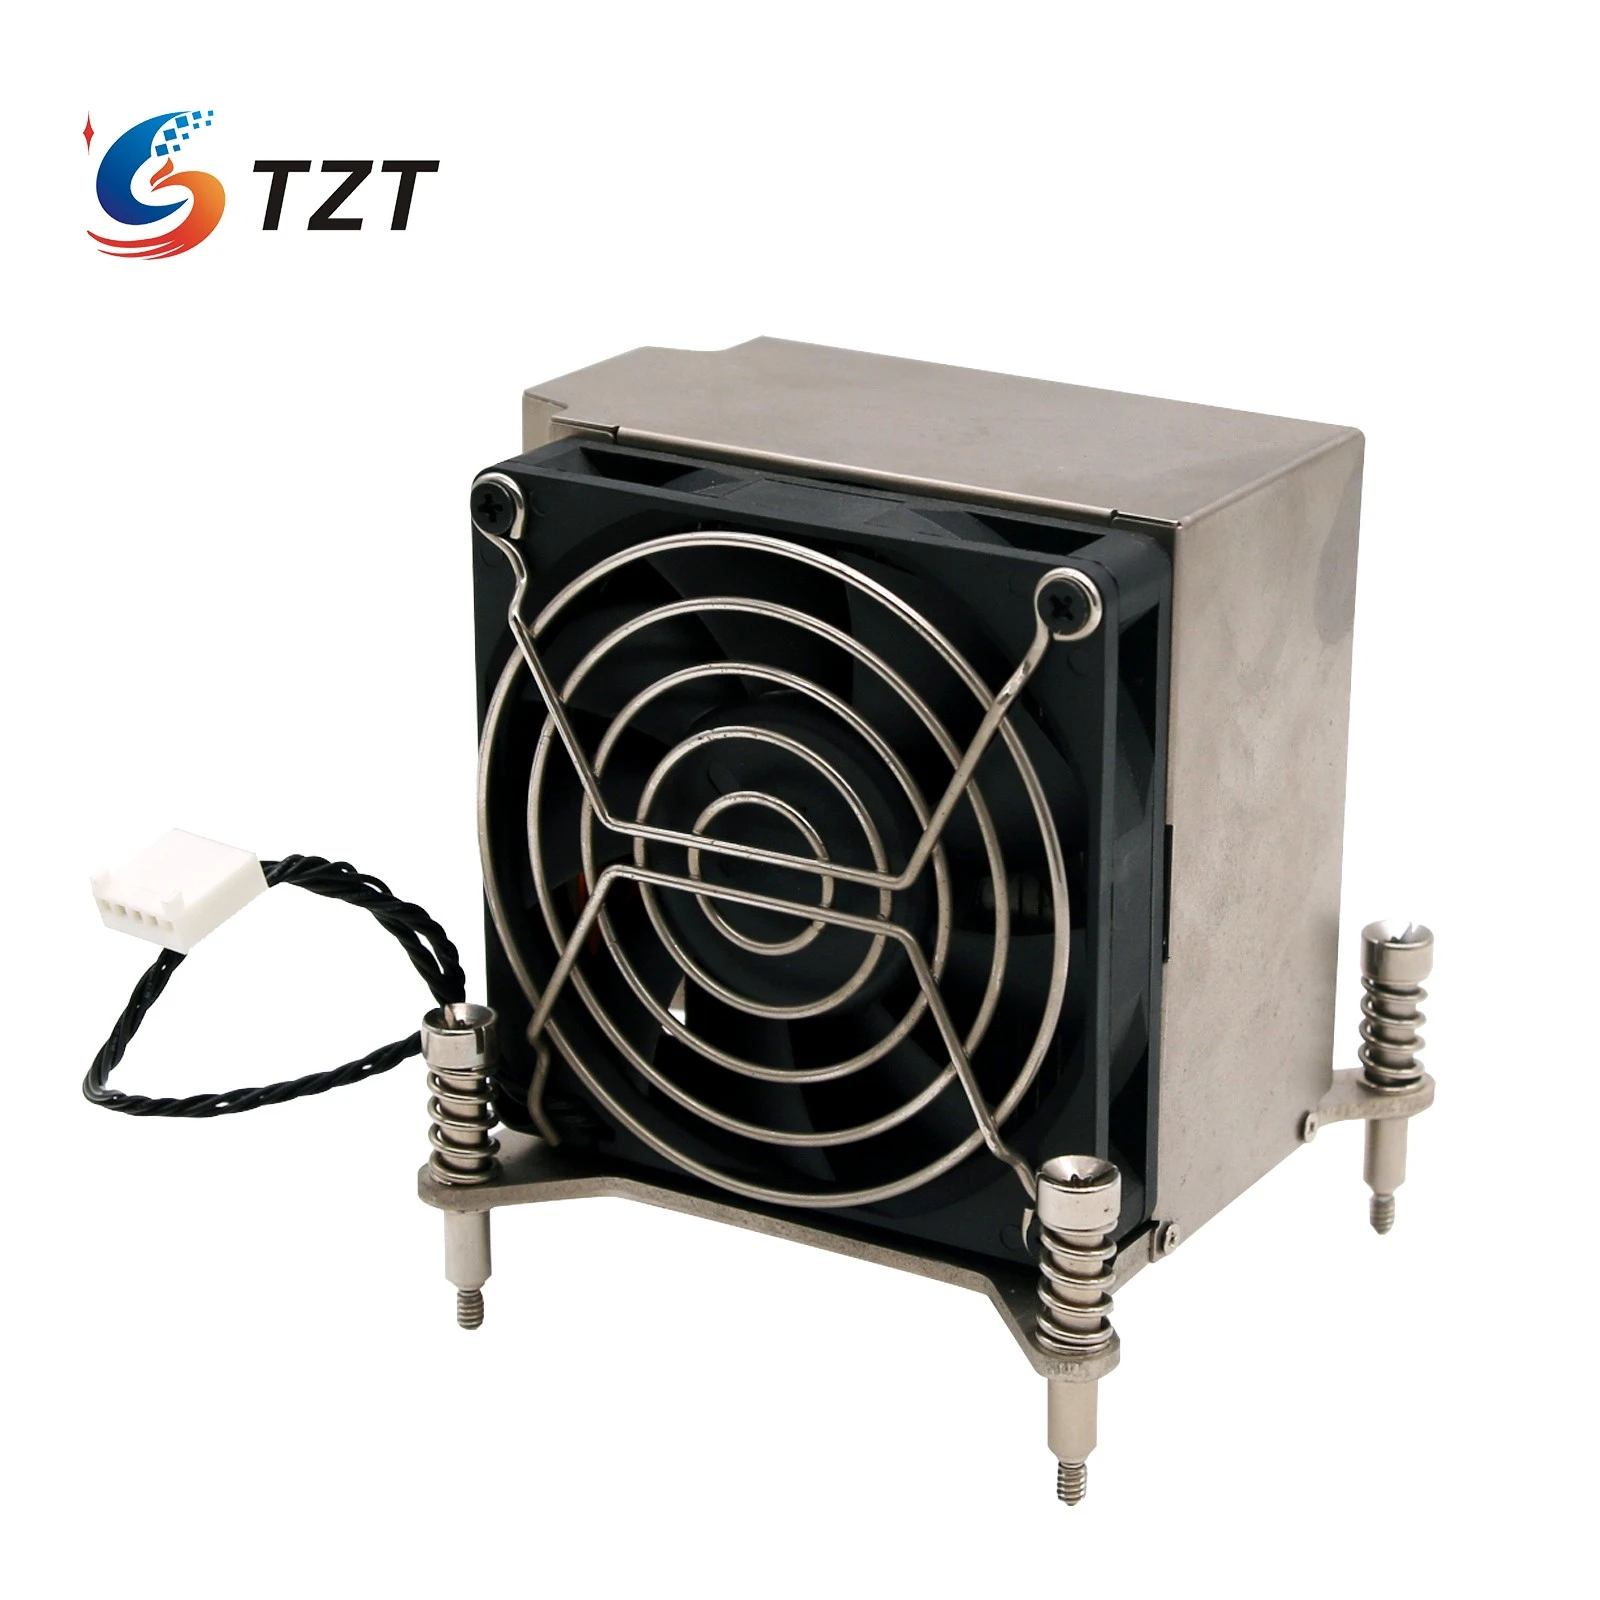 gold In response to the glass Tzt Cpu Radiator Cooler Replacement For Hp Z600 Z800 Workstation Radiator  Fan 463990-001 - Voice Recognition/control Modules - AliExpress